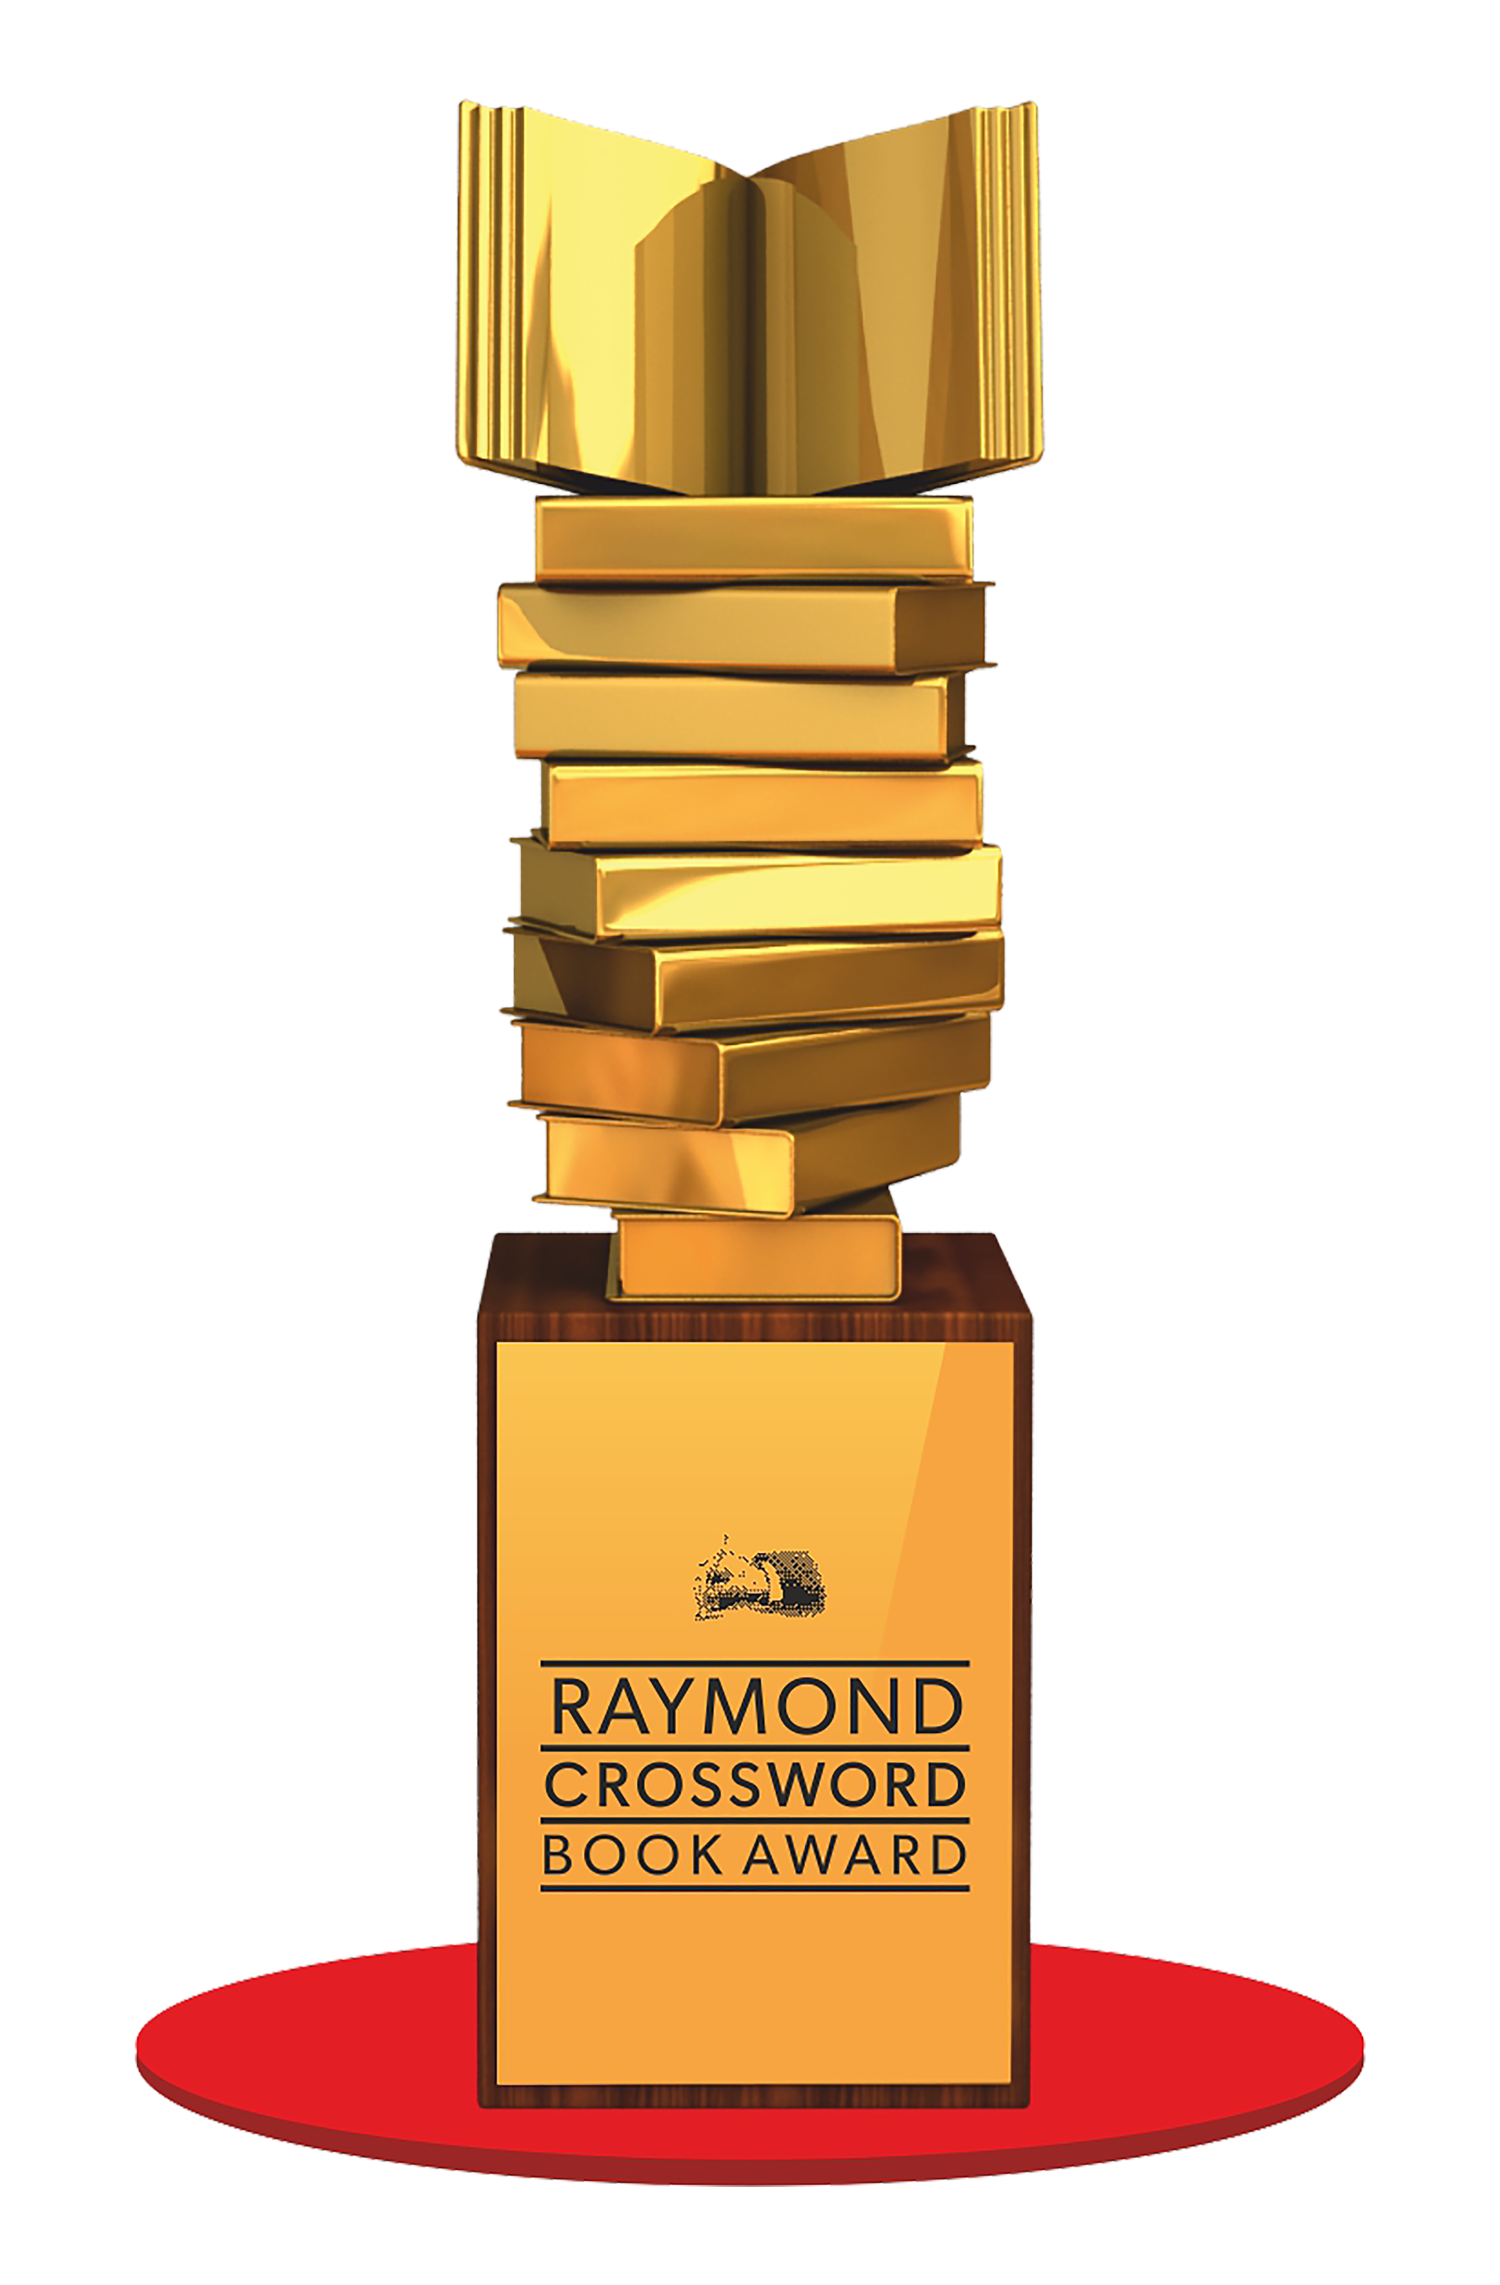 You are currently viewing Shashi Tharoor, Namita Gokhale, Jerry Pinto, Ruskin Bond in the 15th Raymond Crossword Book Award jury shortlist